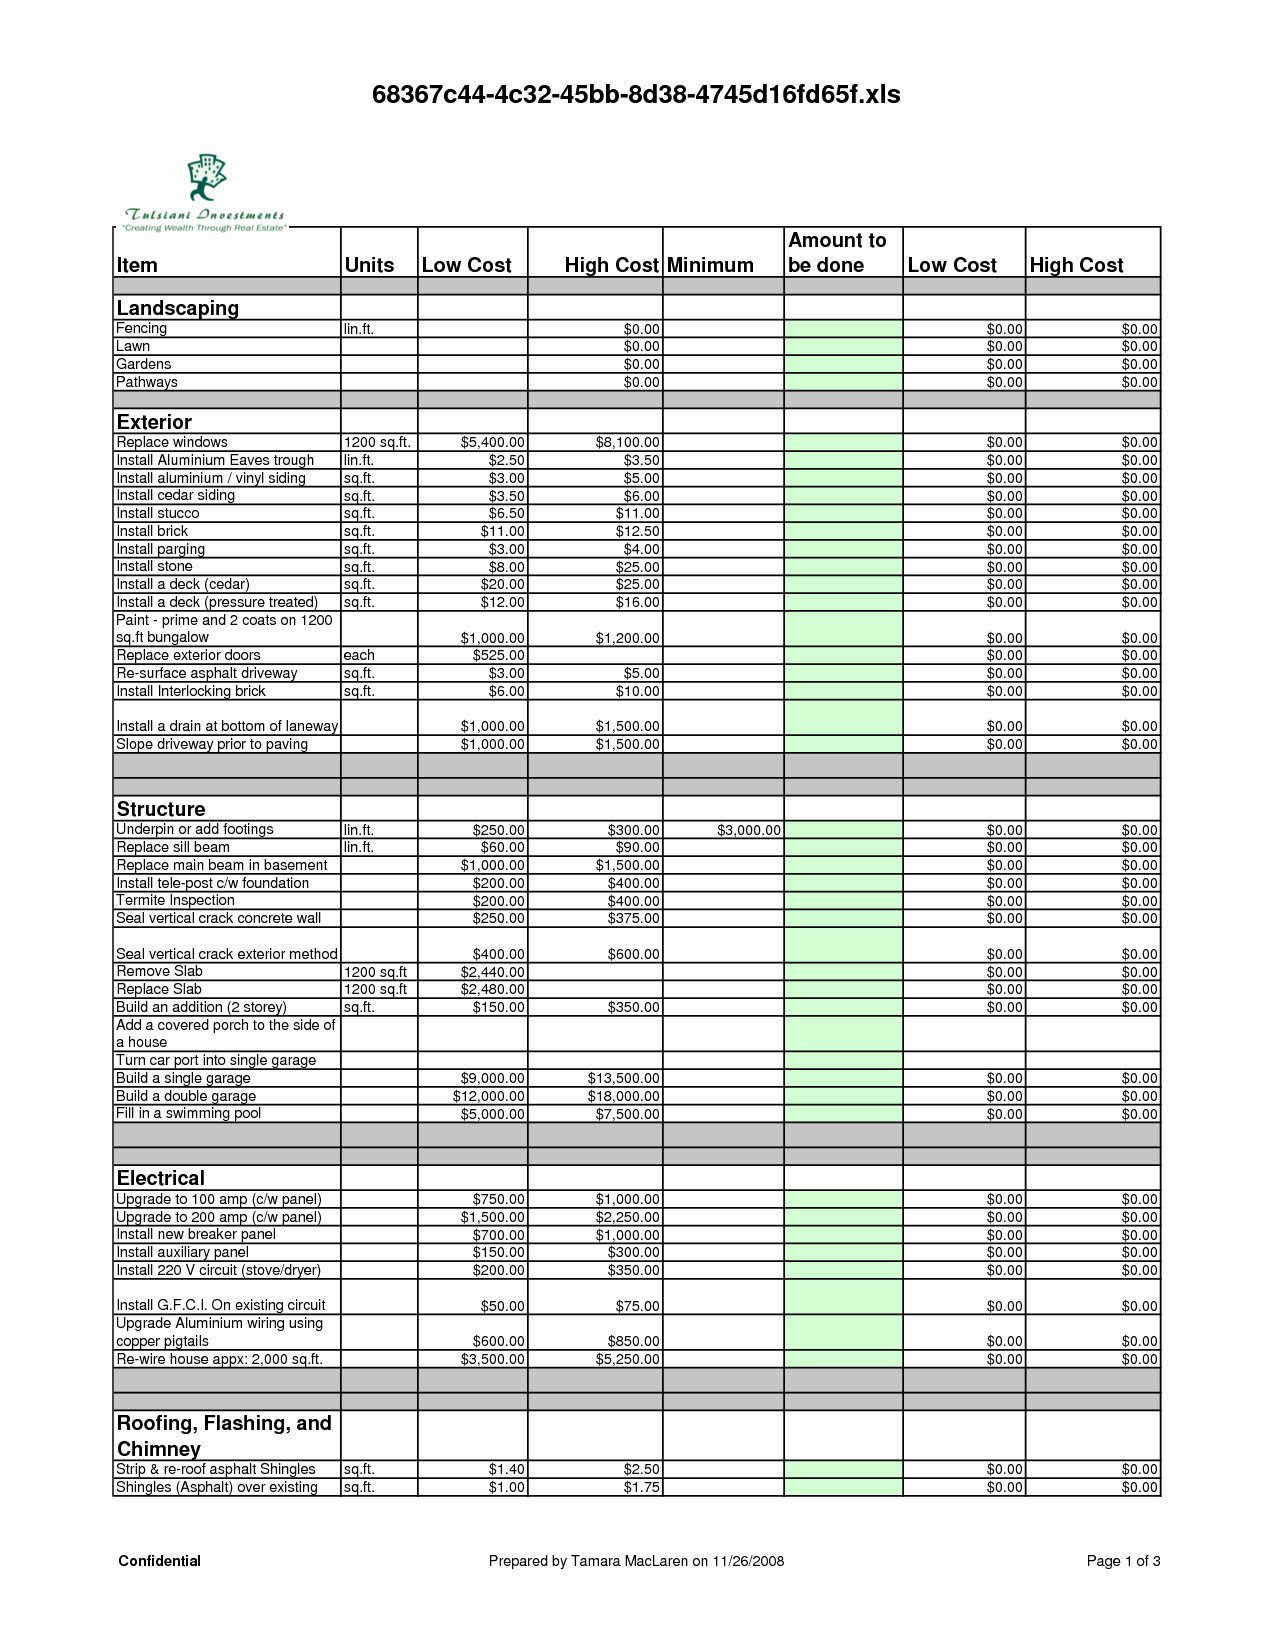 Home Repair Estimate Template Awesome Spreadsheet Pdf Inside Home Repair Estimate Template and